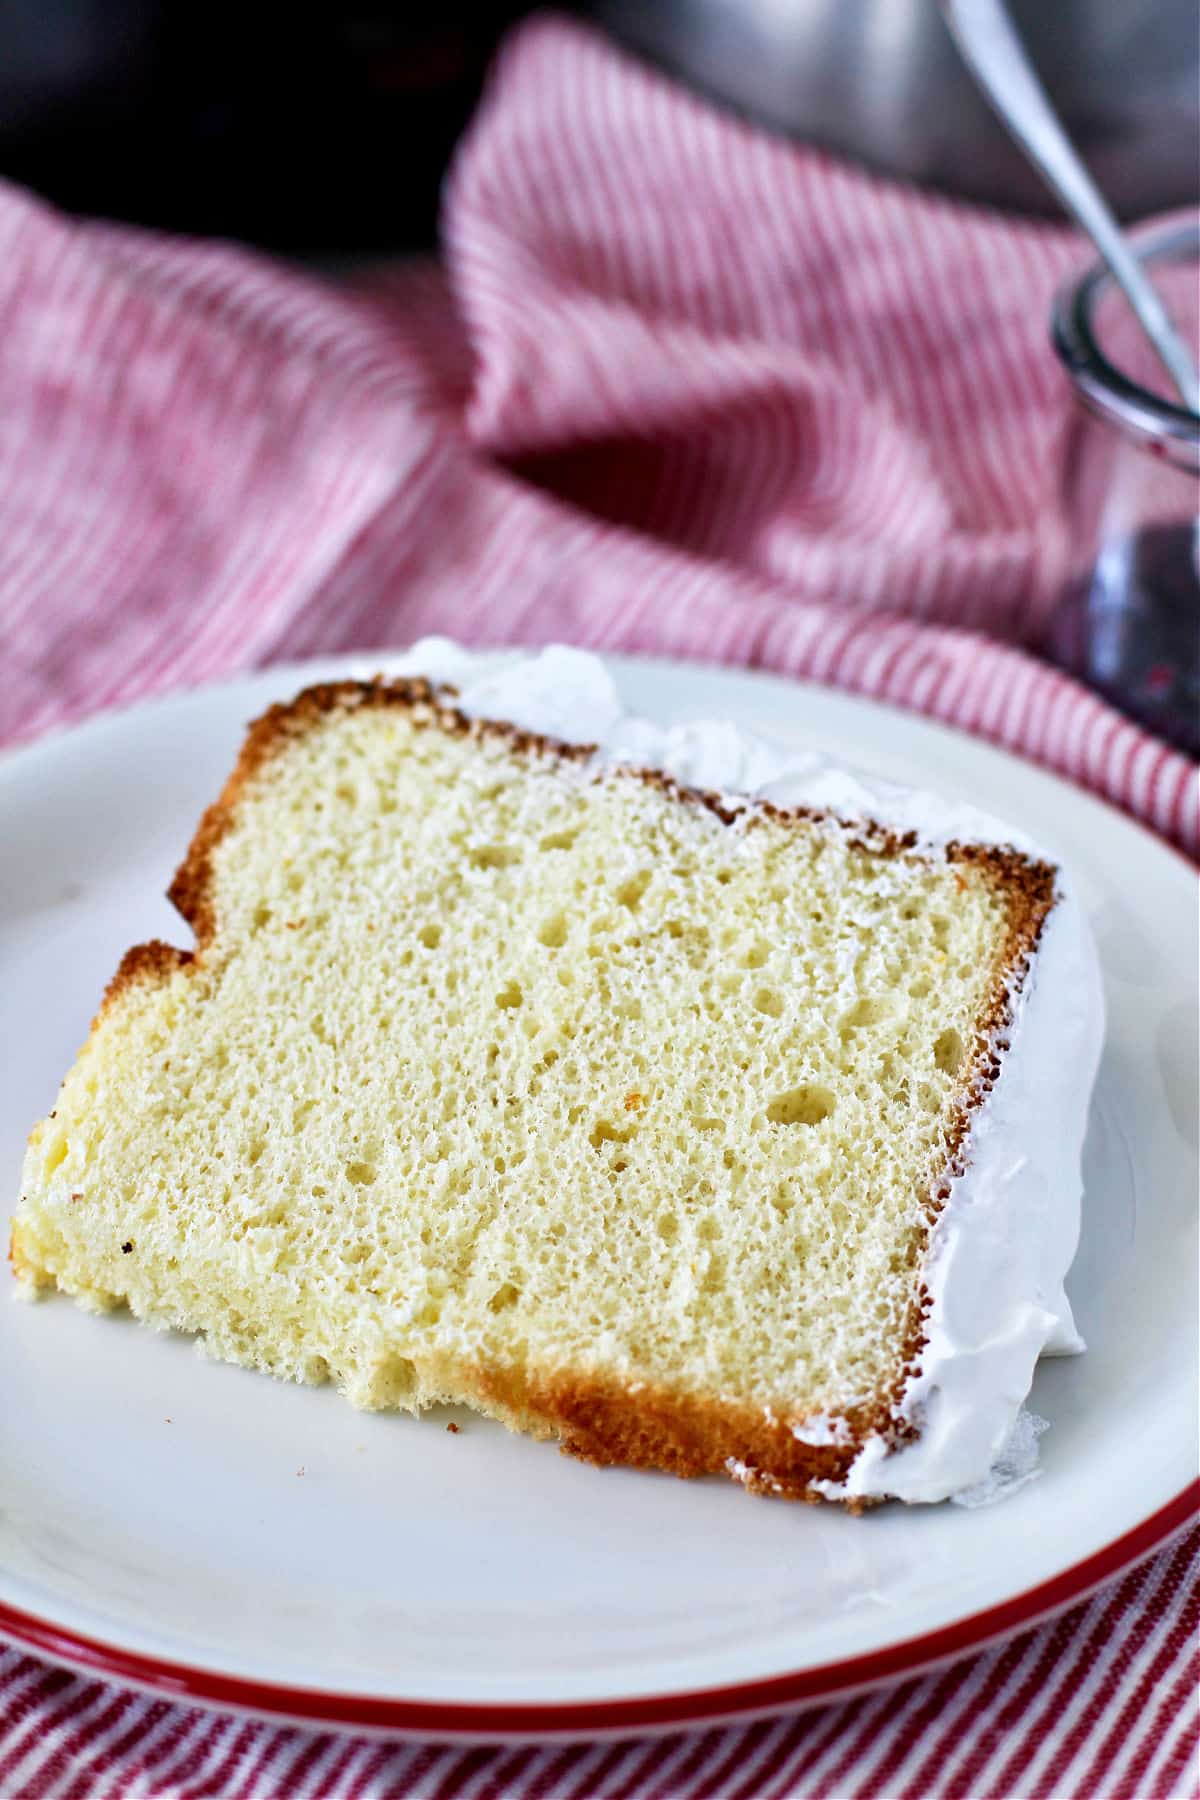 Olive Oil Chiffon Cake with whipped cream frosting on a plate.